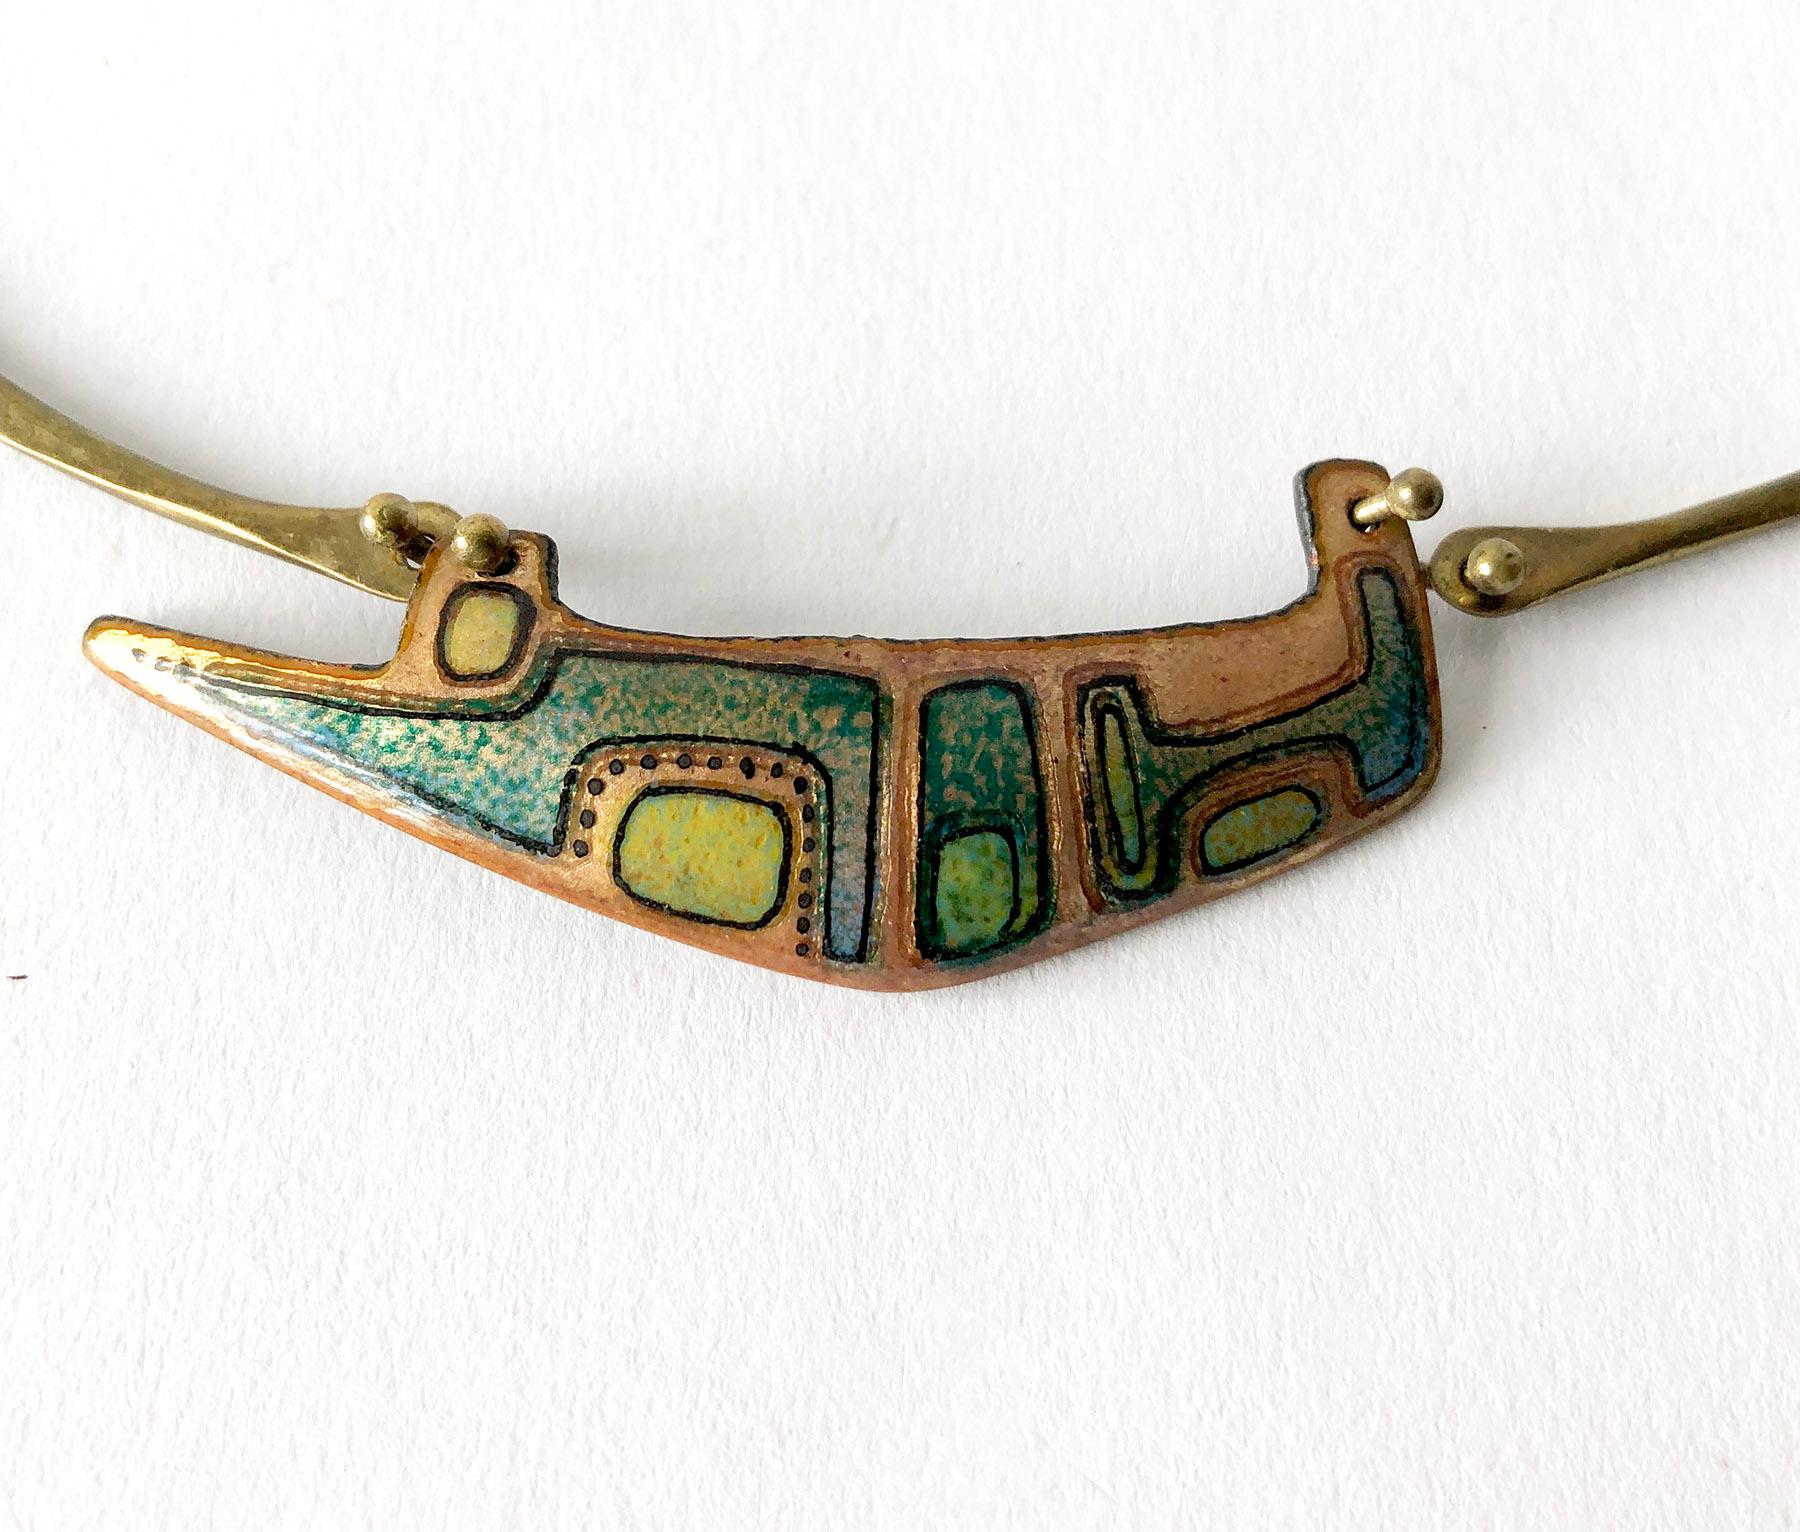 Bronze necklace with enameled abstract design created by Jack Boyd of San Diego, California.  Necklace has a neck measurement of 18